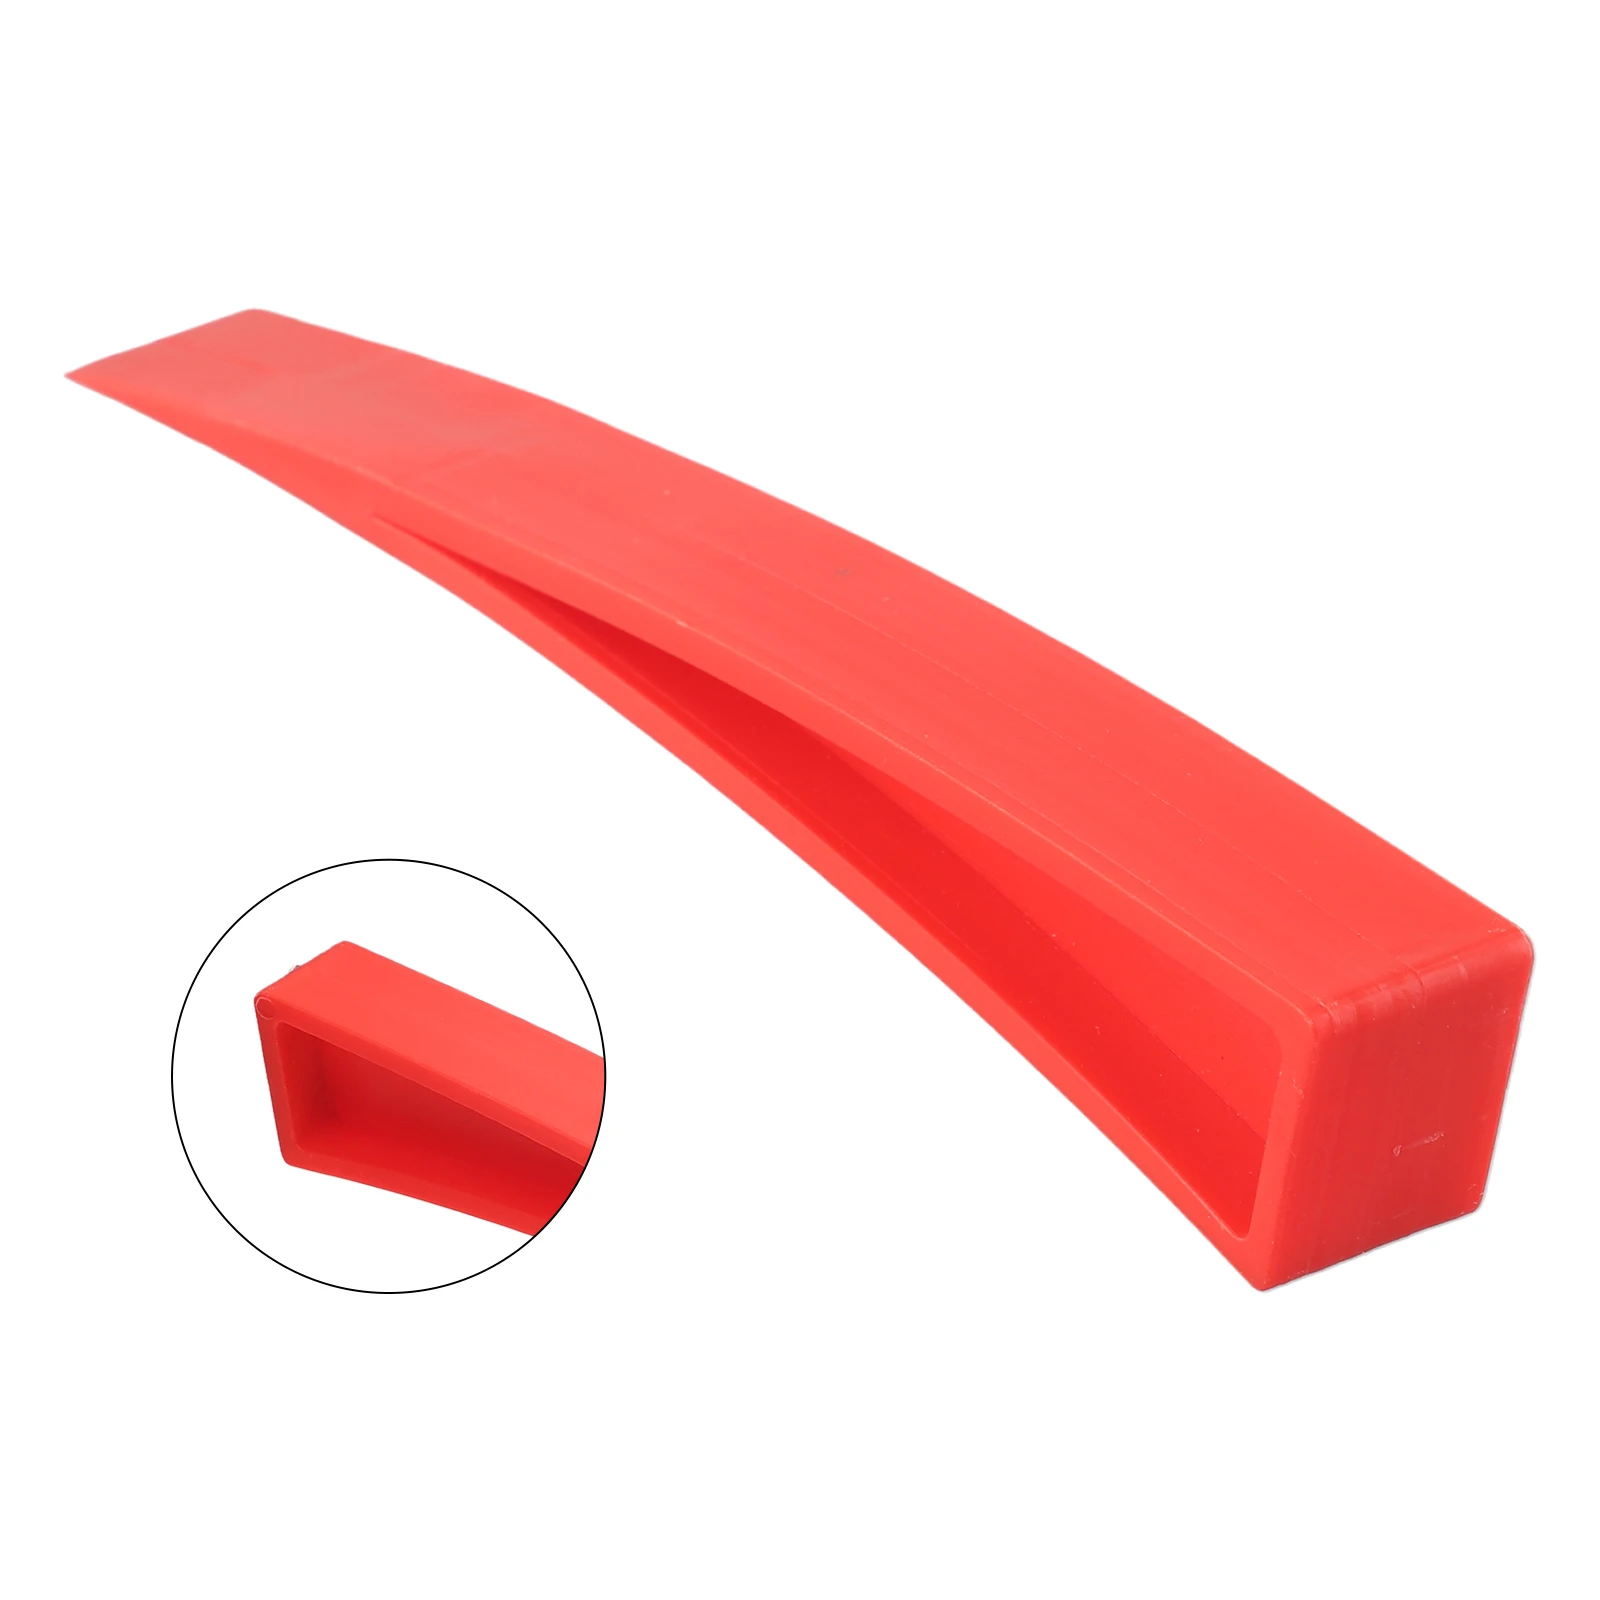 Red Auto/Car Door For Window Wedge Panel Paintless Dent Removal Repair Hand Tool Plastic-Accessories For Vehicles car disassembly panel removal tool pry bar for seat leon ibiza cupra ateca formentor tavascan alhambra niva kalina accessories